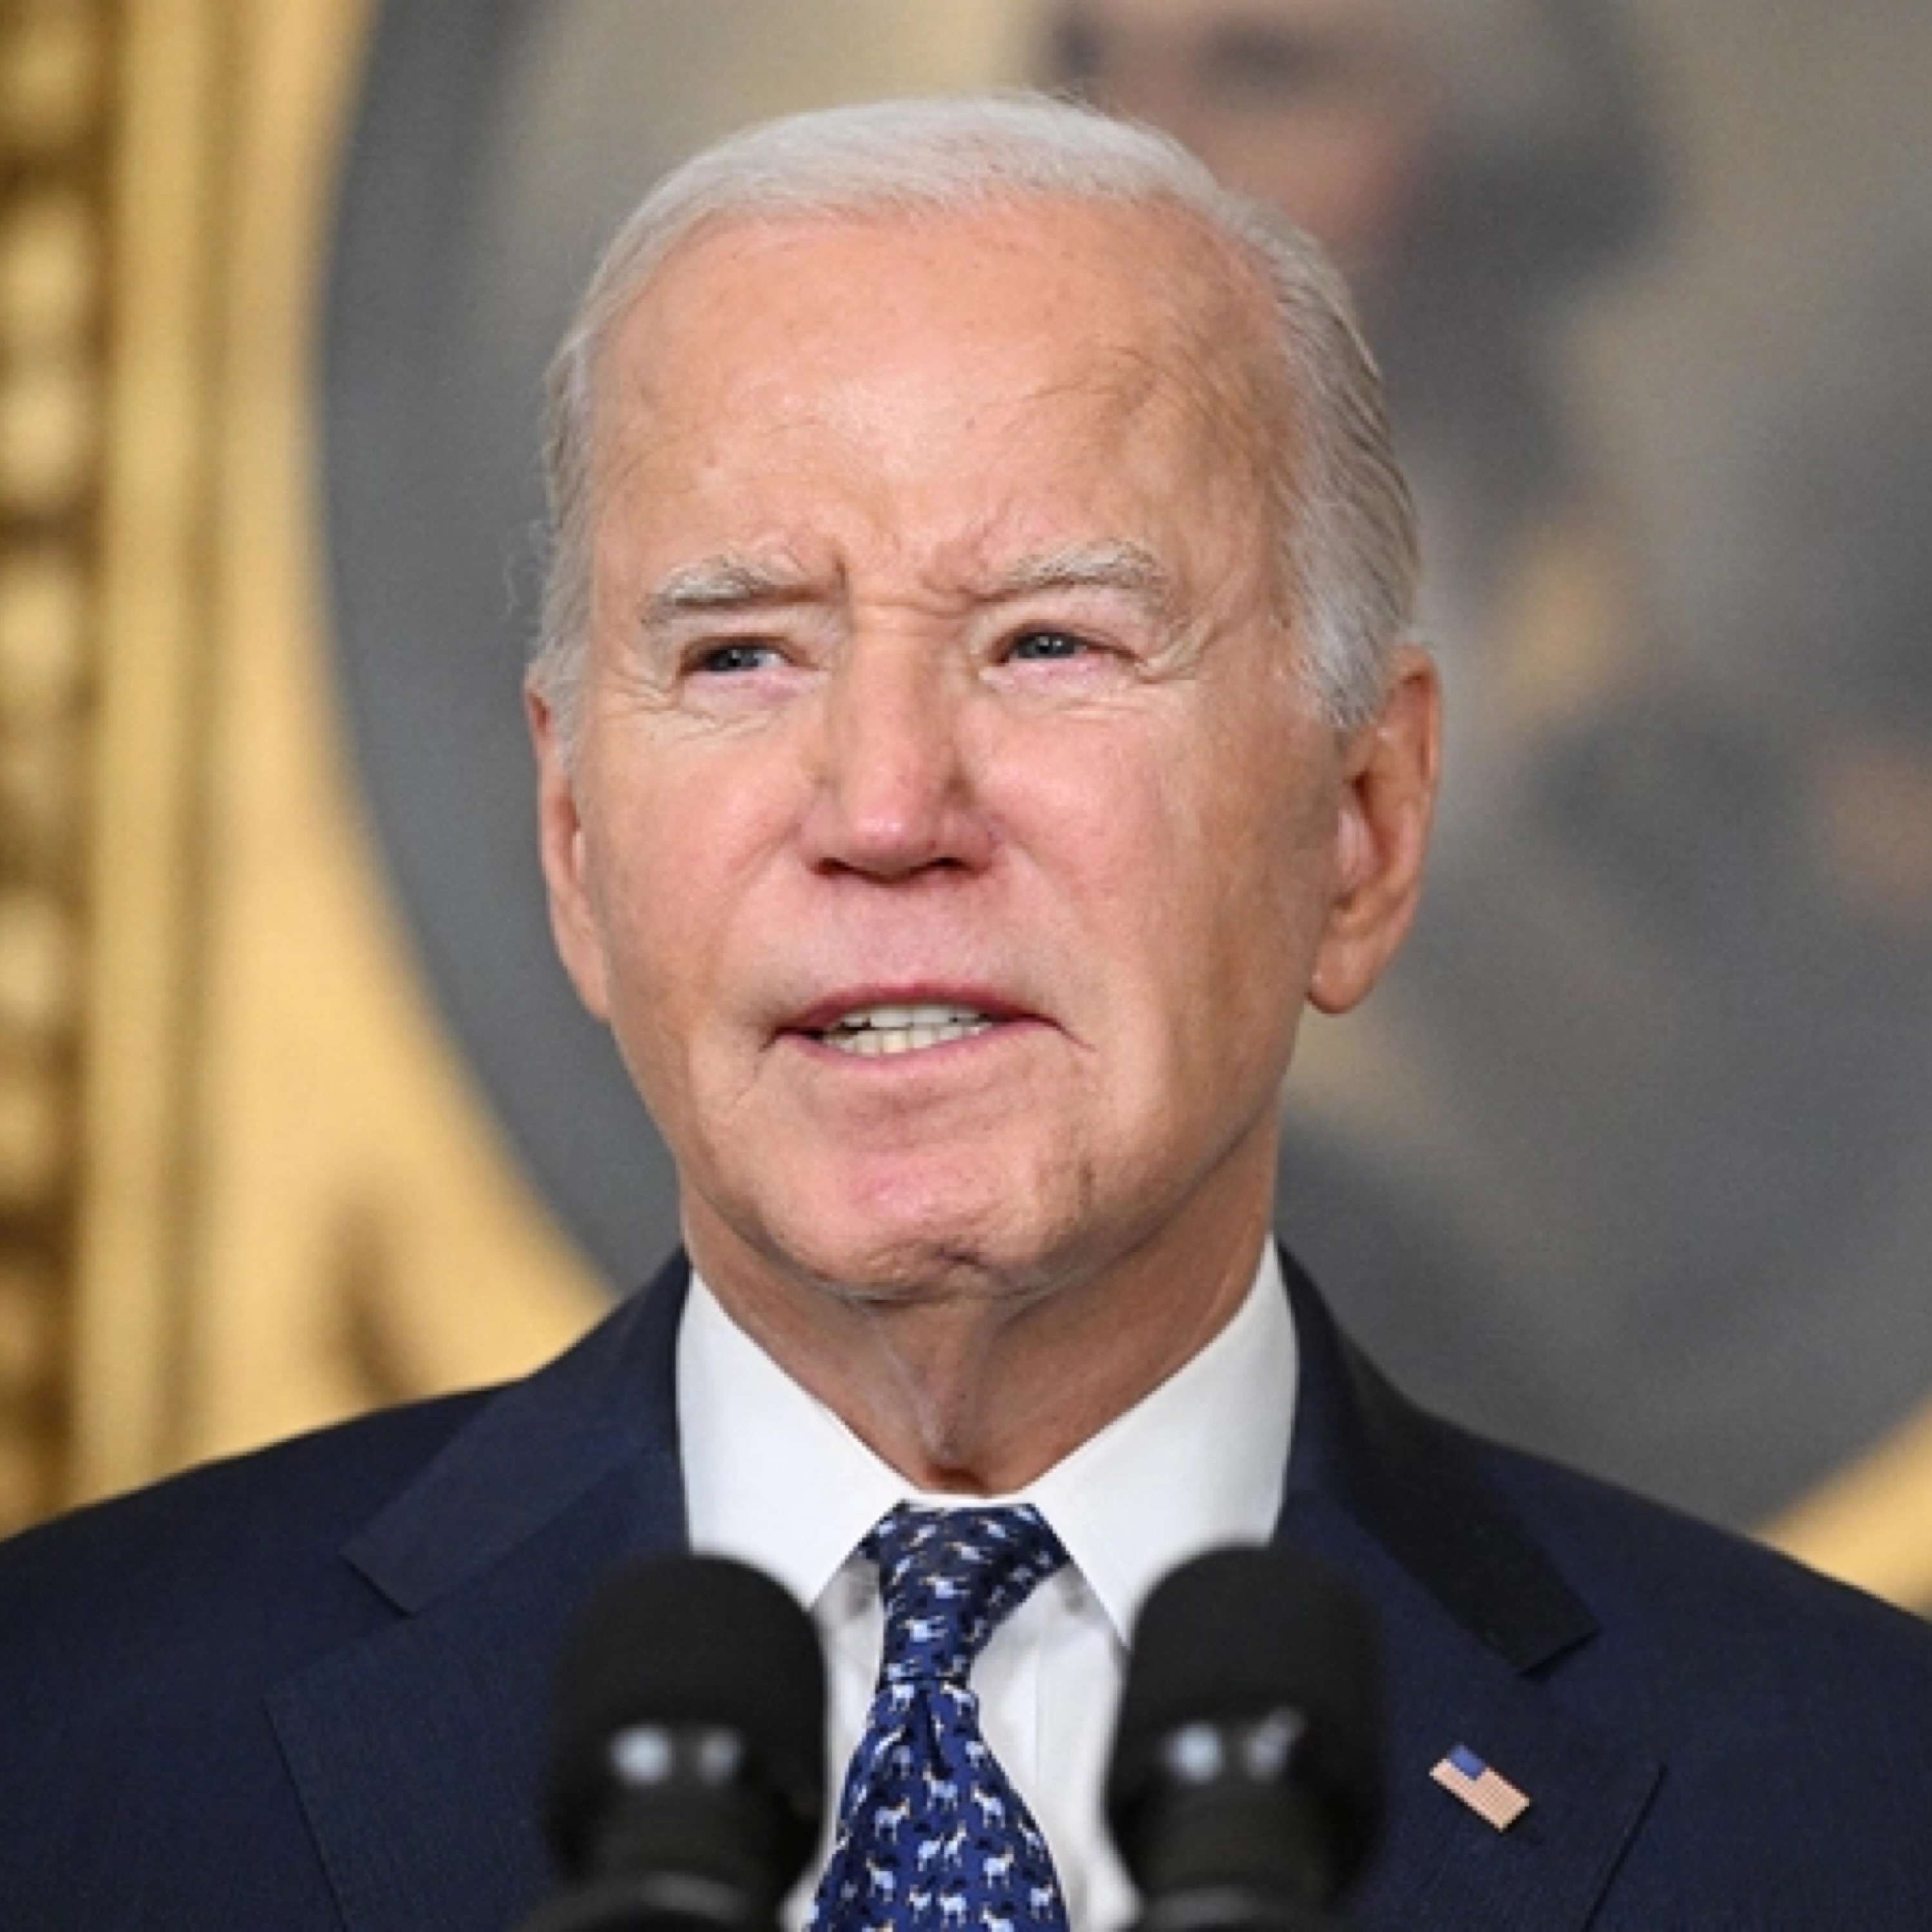 Biden Threatens to Cut Off Weapons to Israel, Missouri Defunds Planned Parenthood, NY Abortion Rights Halted